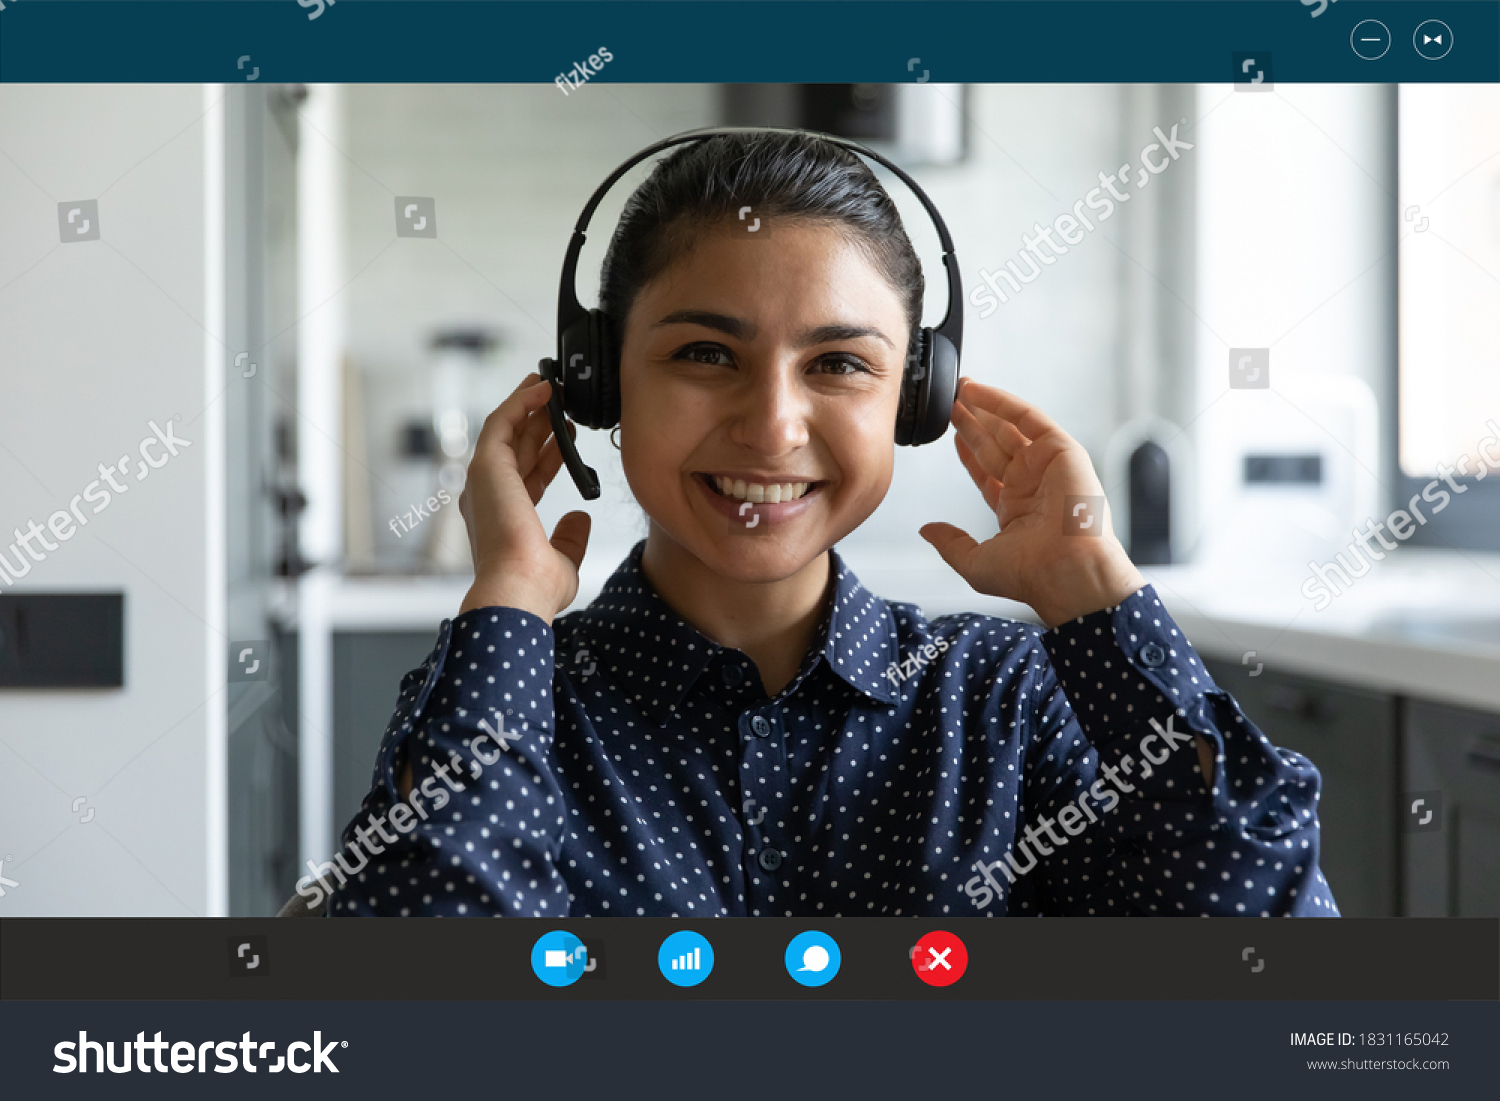 Screen view close up headshot portrait of smiling young Indian female agent in earphones talk consult client customer online. Happy ethnic woman have webcam digital virtual conference or web meeting. #1831165042